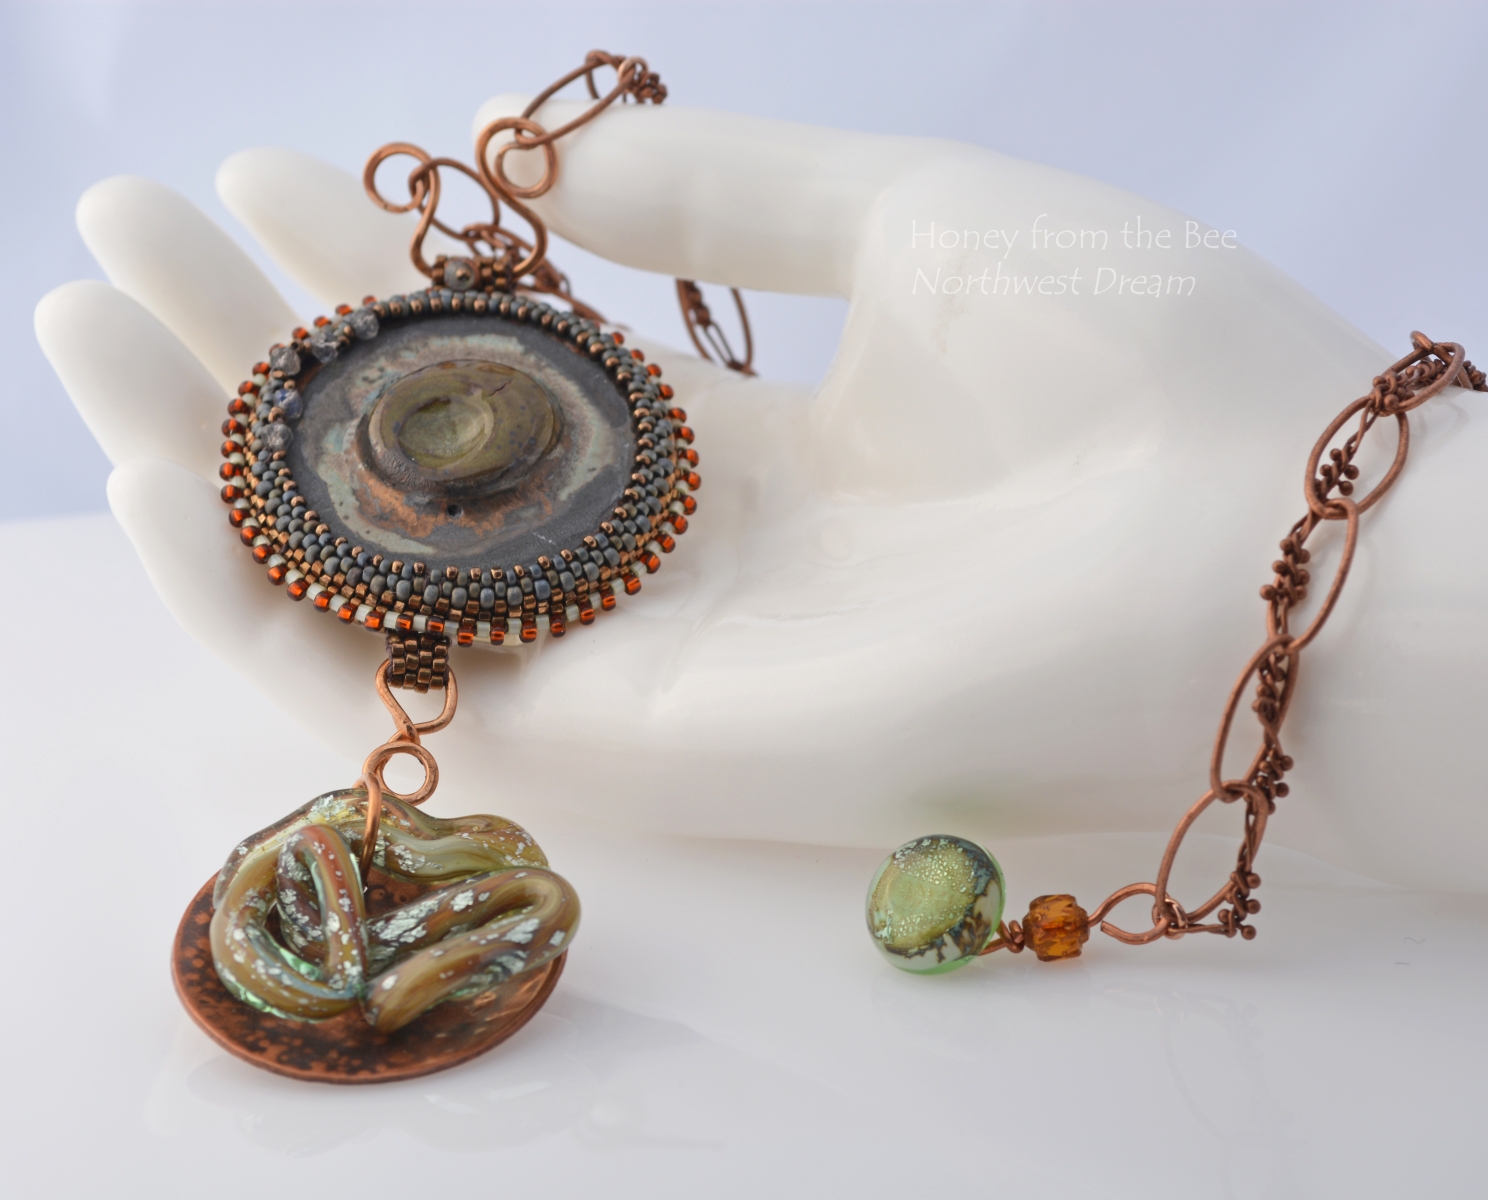 Mixed Media artisan necklace by Honey from the Bee